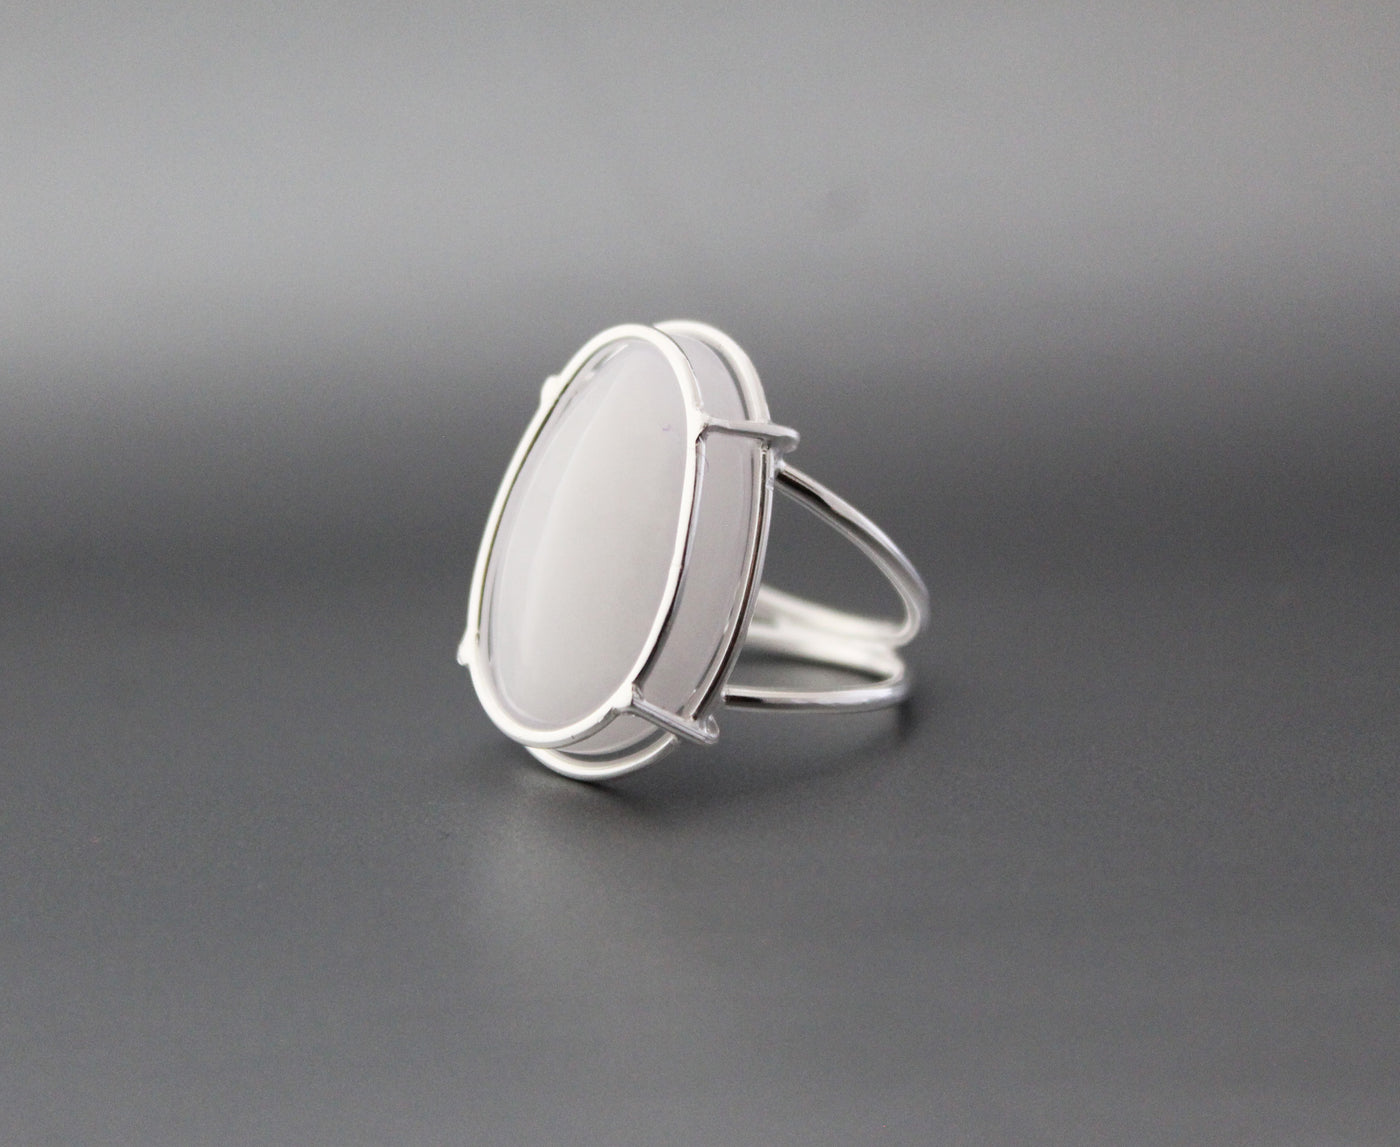 White Agate Ring, White Stone Ring, Gemstone Ring, Stackable Solitaire Ring, Sterling Silver 925, Statement, White stone, Organic , Boho